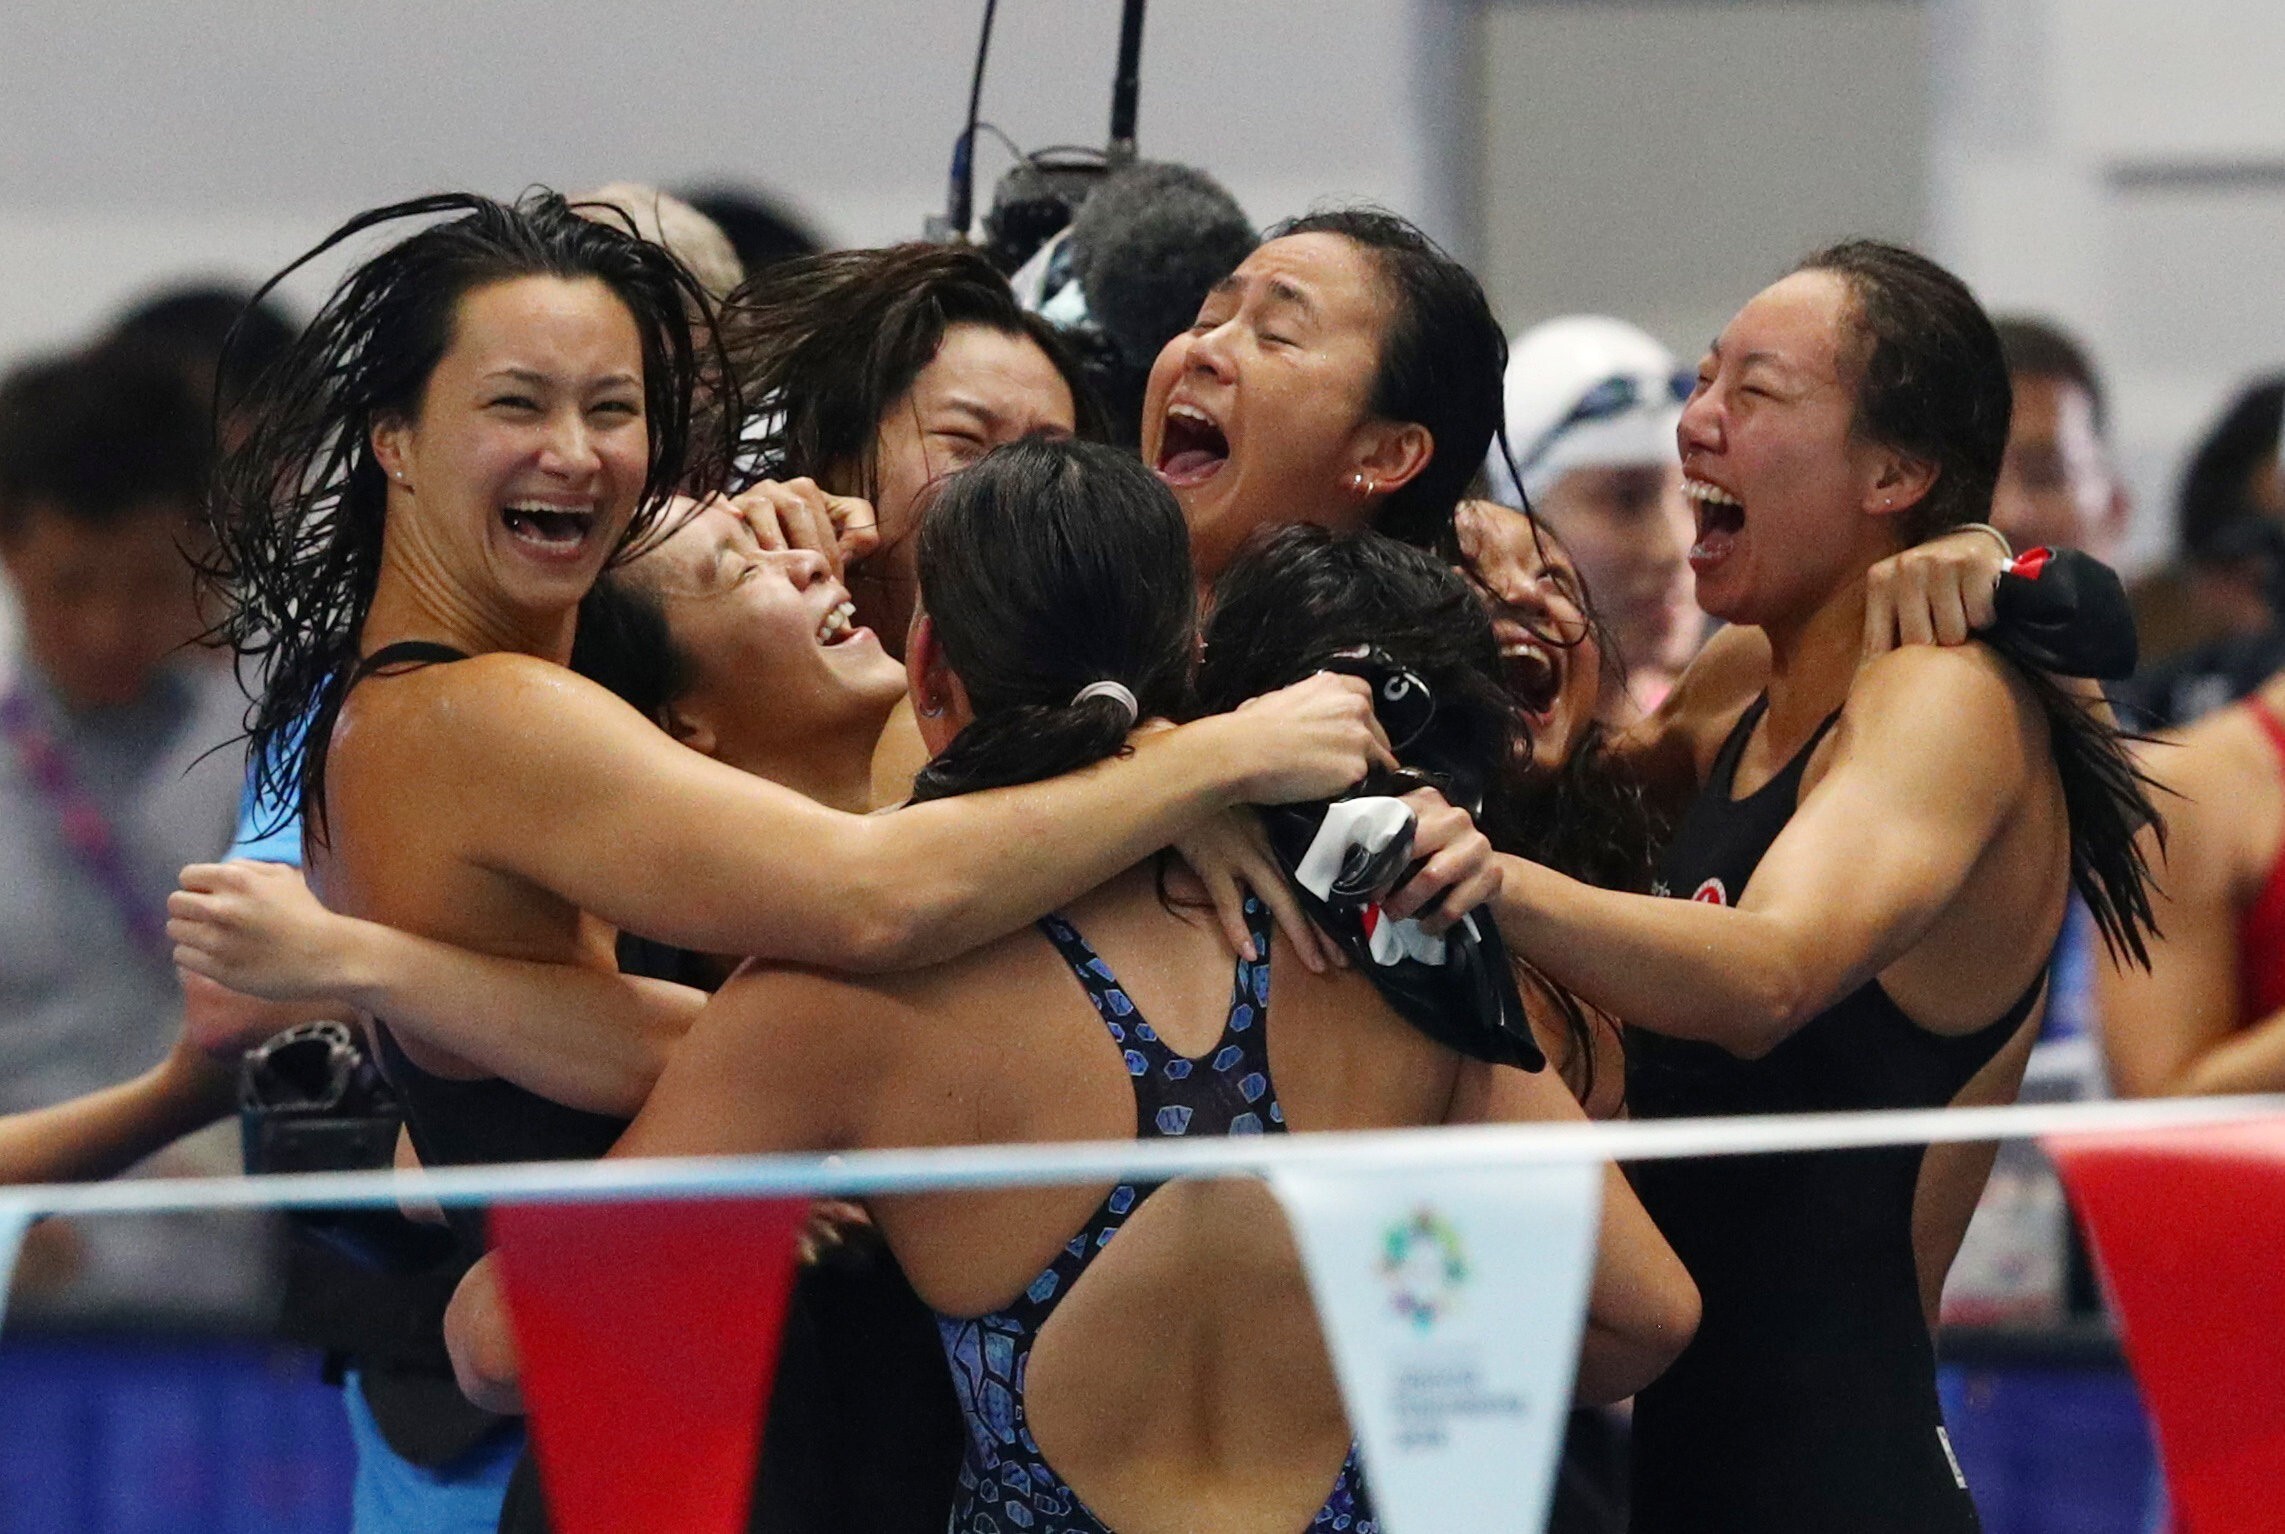 Hong Kong women’s medley relay team celebrate after capturing a silver medal at the 2018 Asian Games in Jakarta. Photo: Reuters